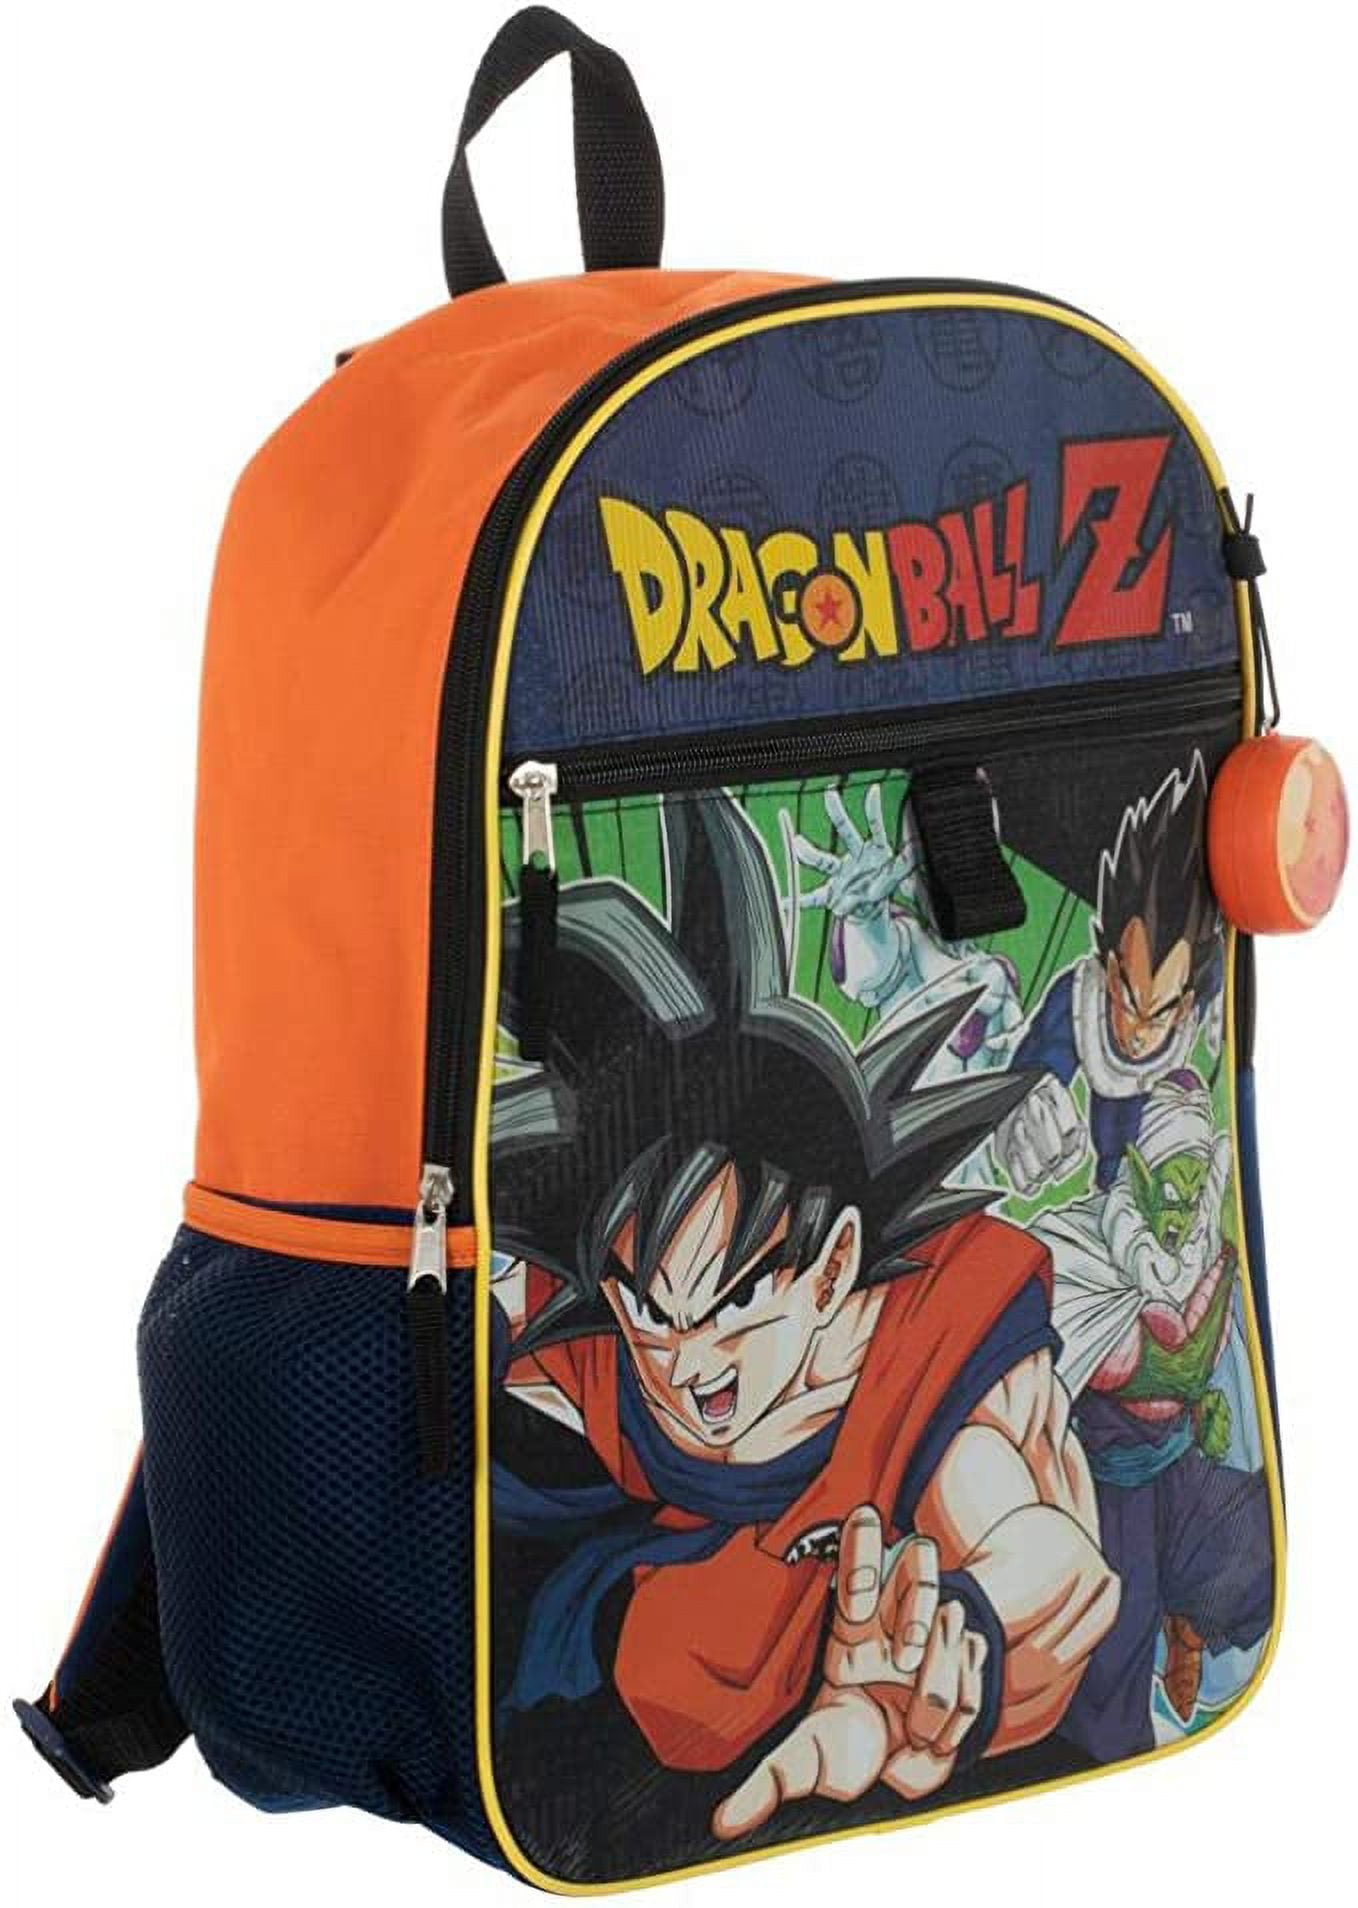 Action Comics Dragon Ball Z Backpack for Boys - Bundle with Dragon Ball  Backpack for Kids, Stickers, Water Bottle, More | Dragon Ball Backpack Set